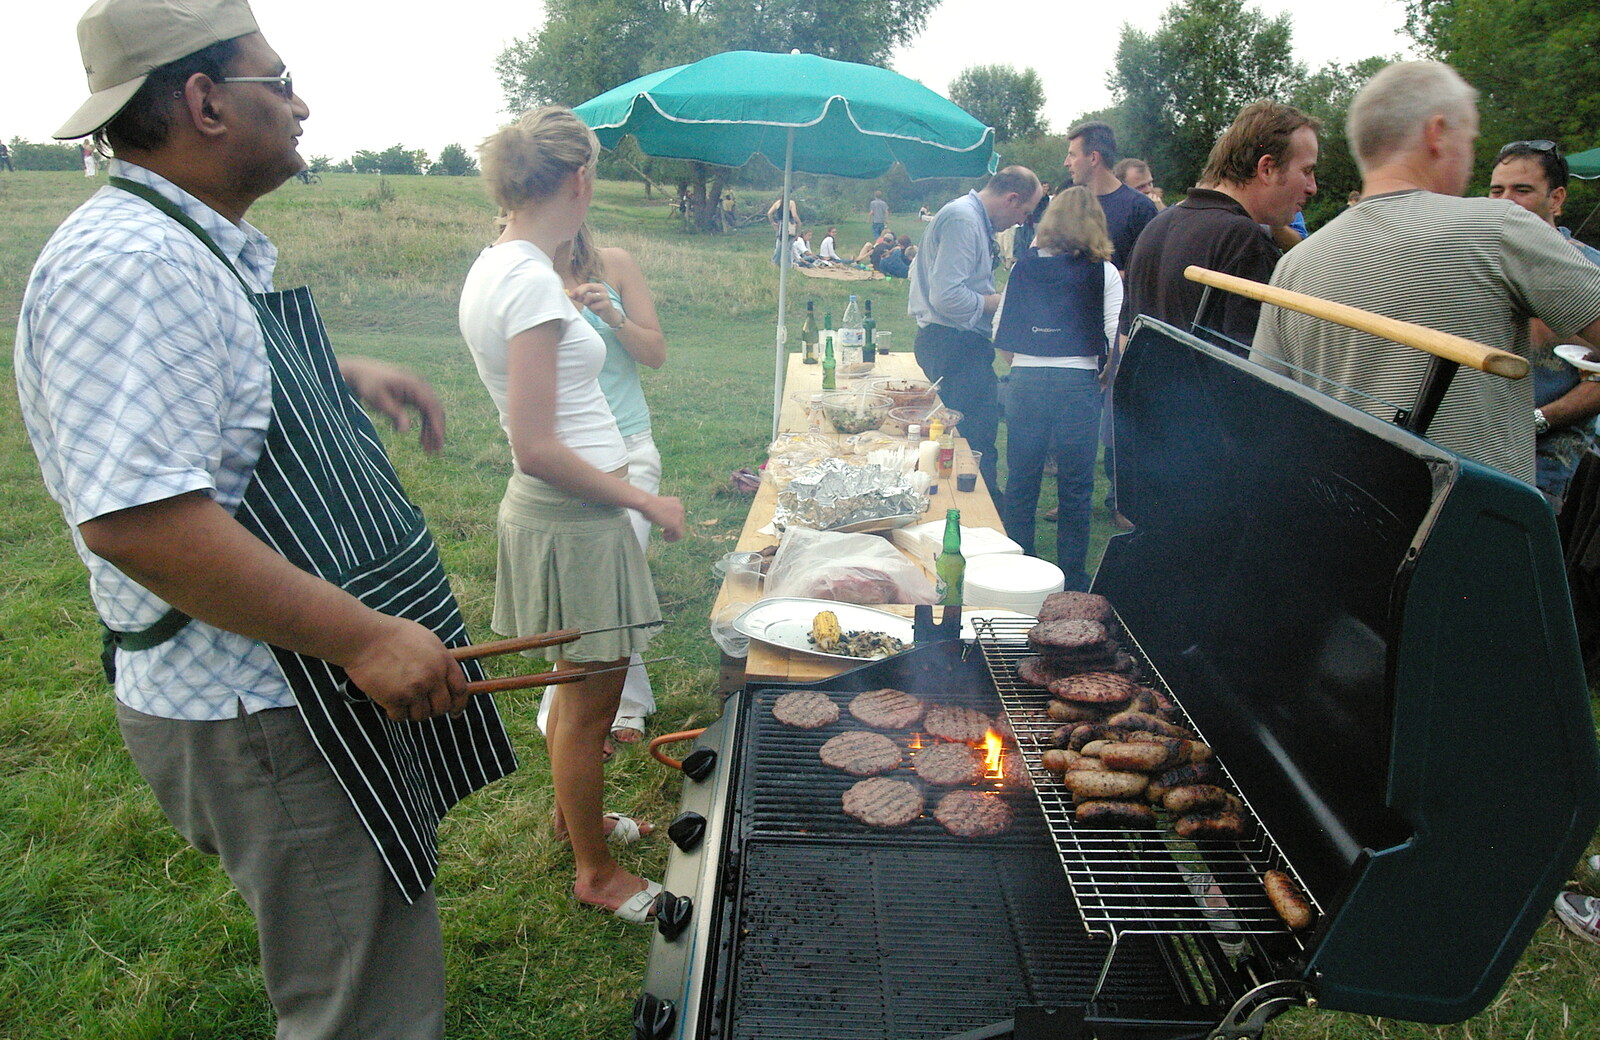 Bill's burgers are on fire from Qualcomm goes Punting on the Cam, Grantchester Meadows, Cambridge - 18th August 2005